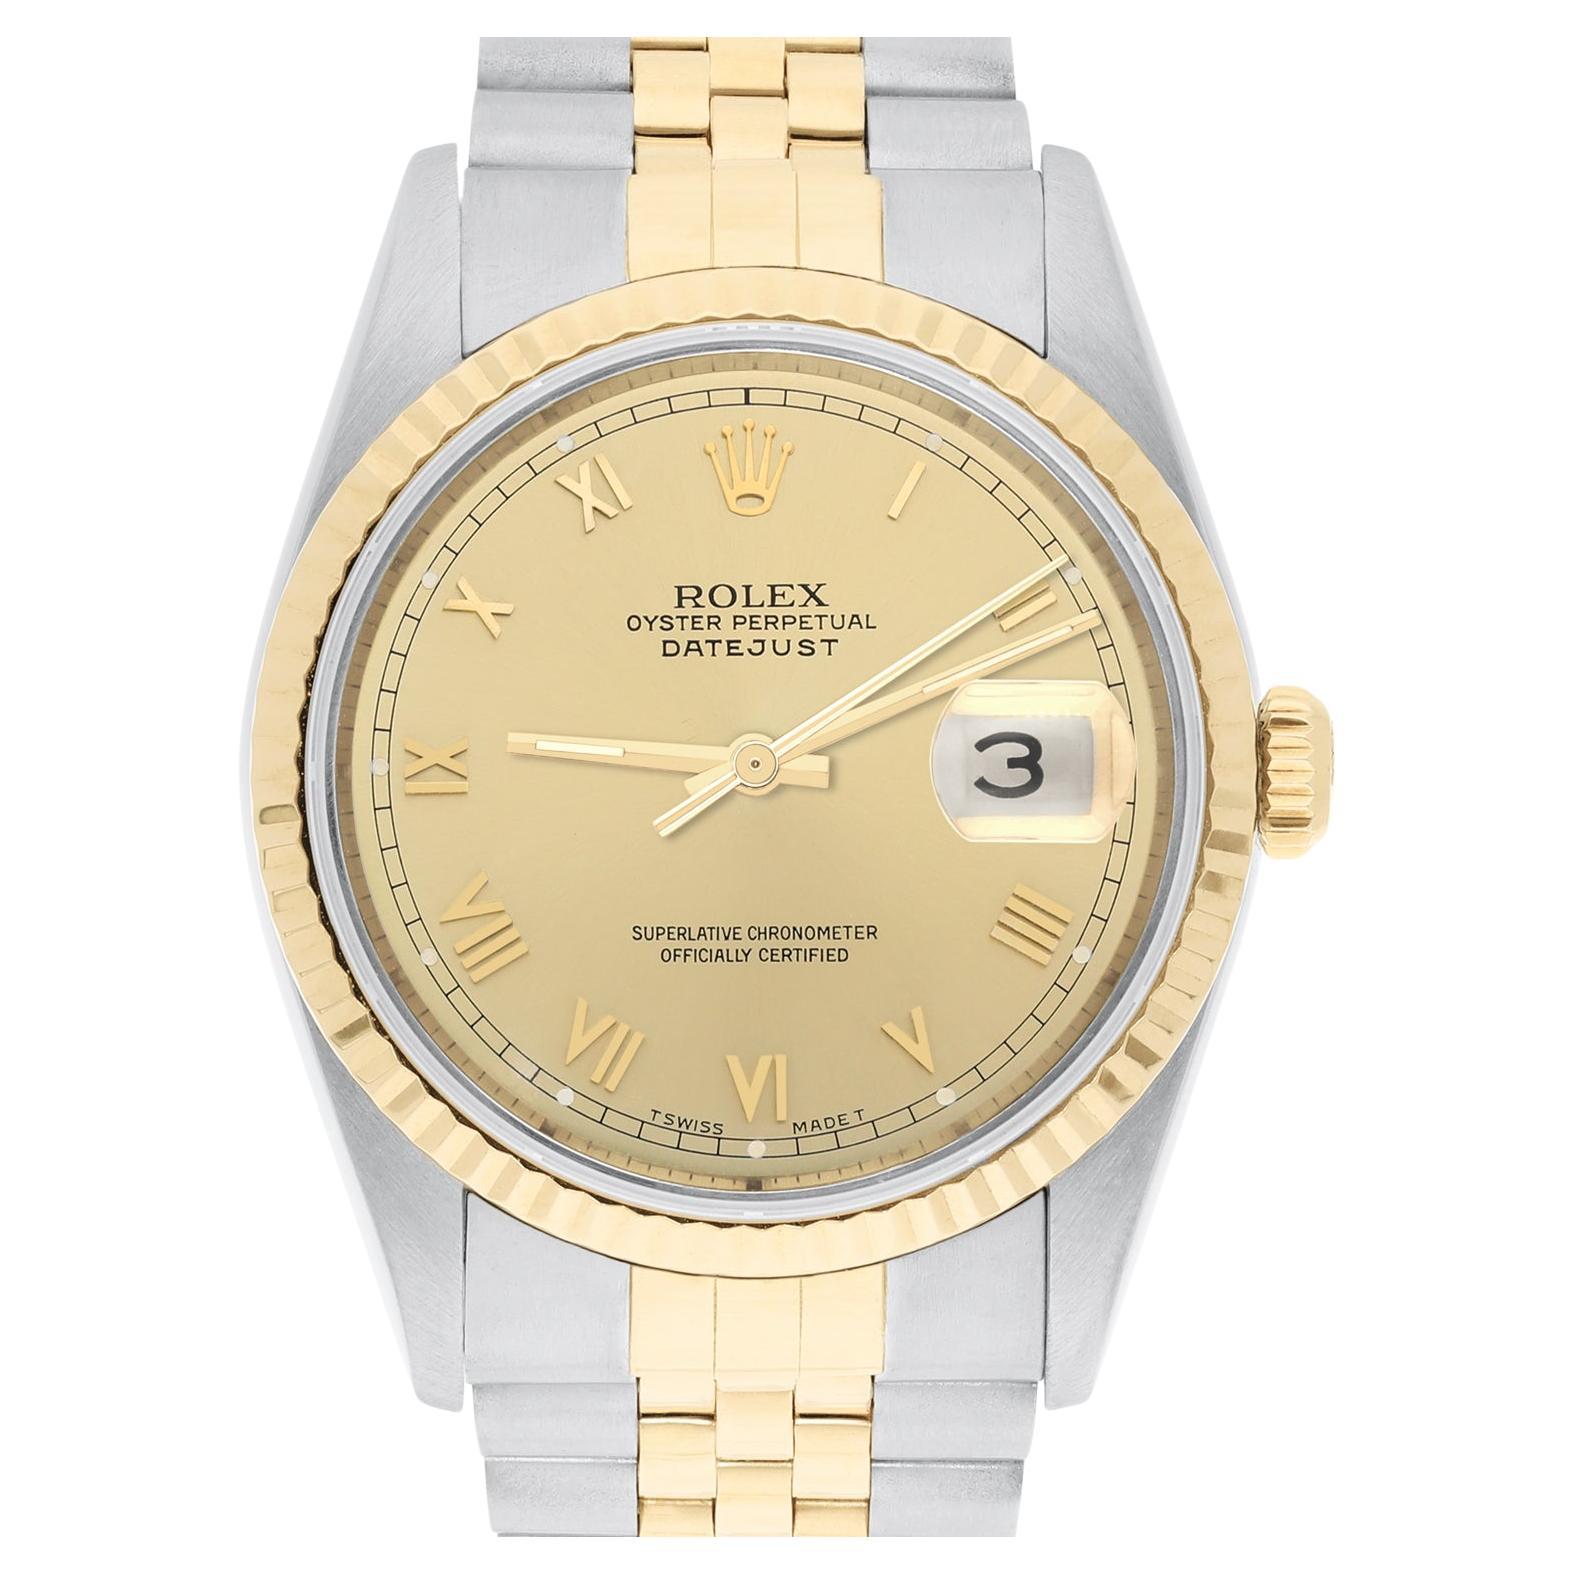 Rolex Datejust 36mm Two Tone Champagne Roman Dial Jubilee 16233 Circa 1995 For Sale